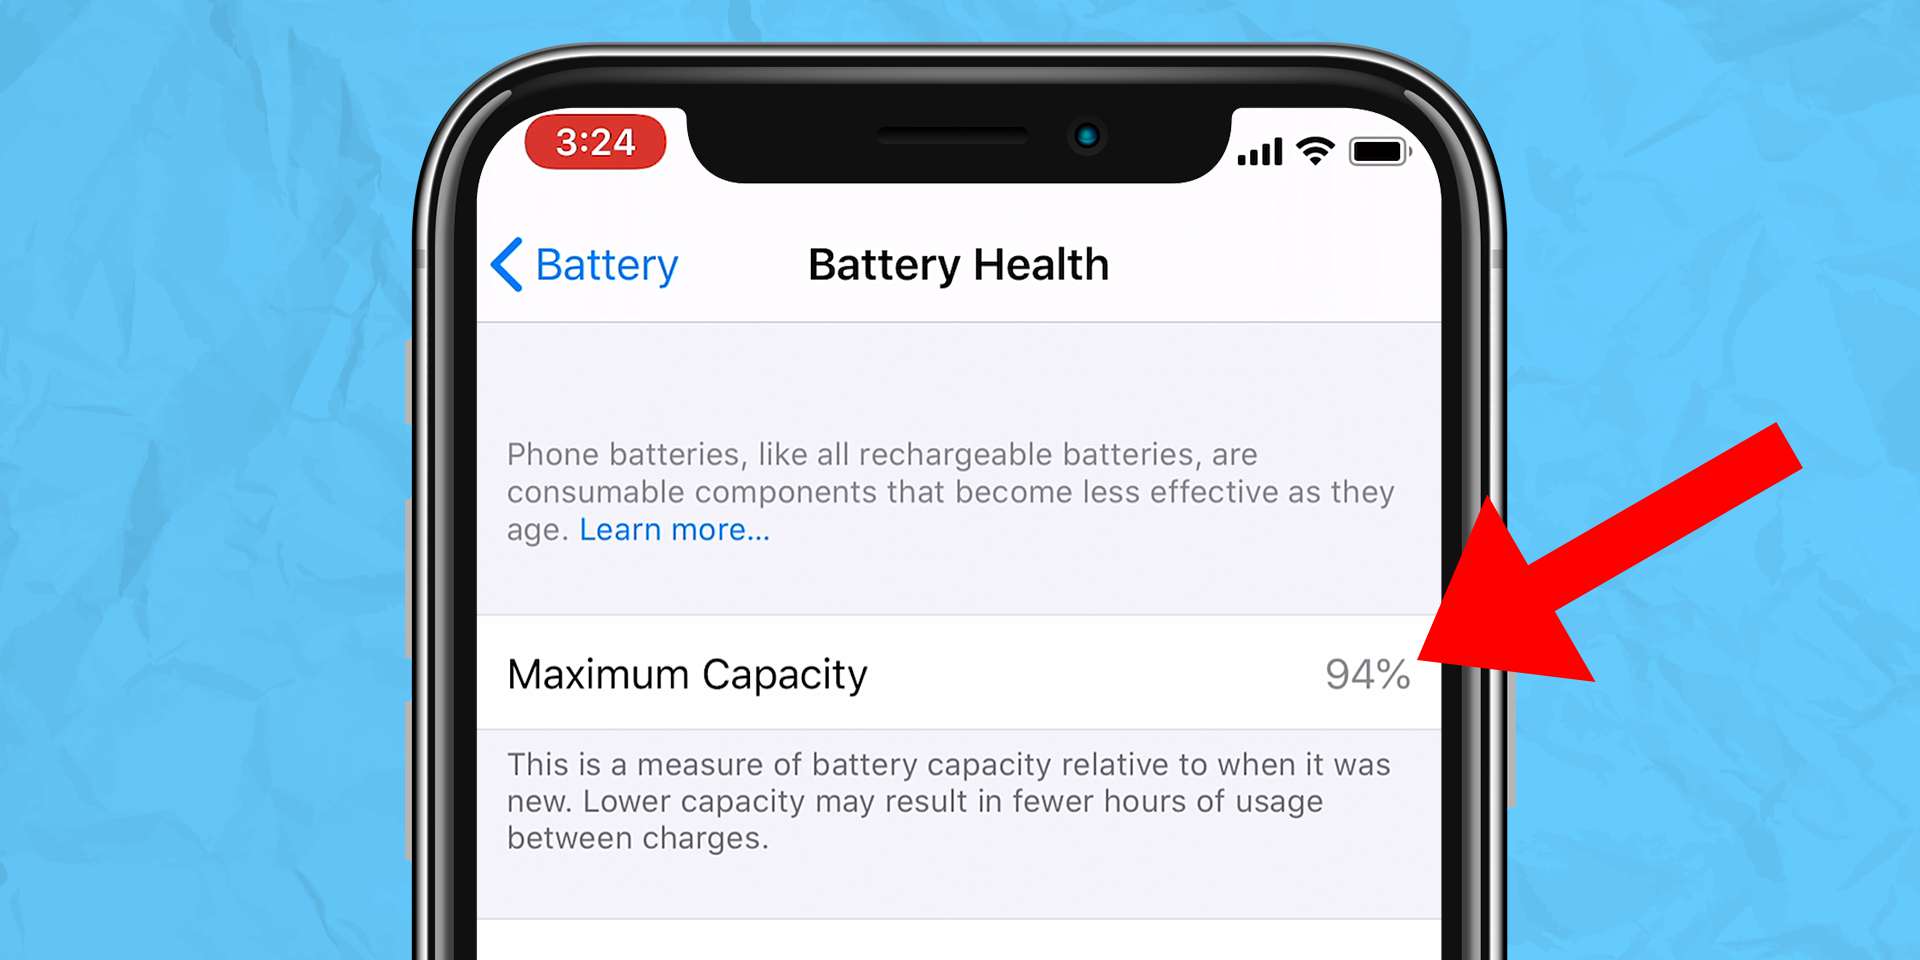 Taboola Ad Example 40982 - Extend Your IPhone Battery Life With A New IOS 13 Feature